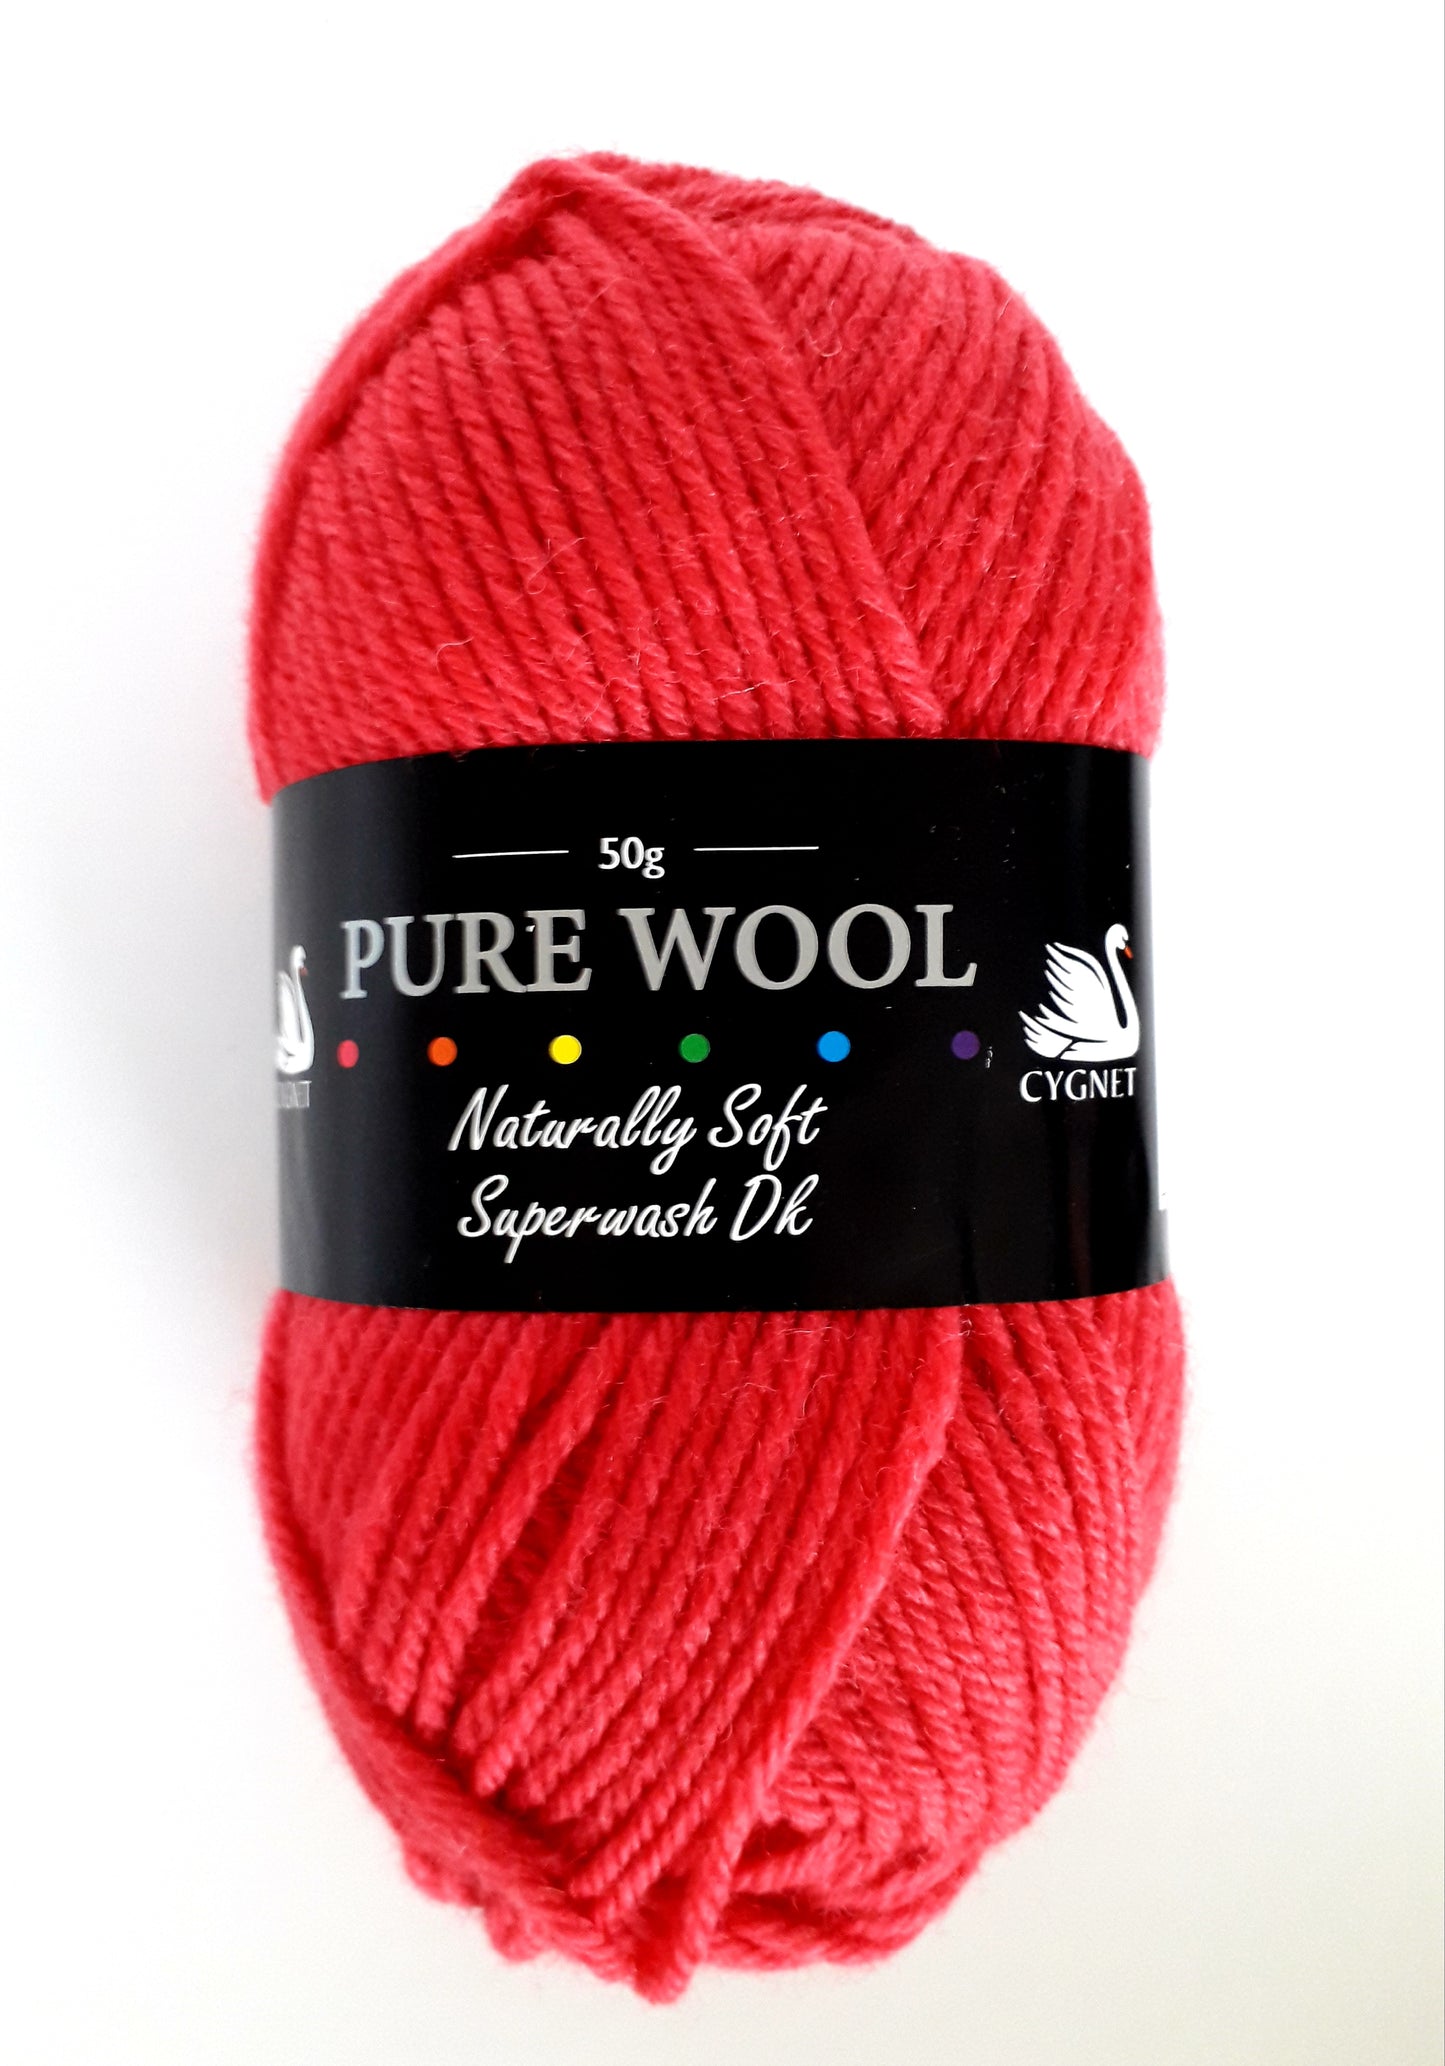 A cherry red ball of yarn